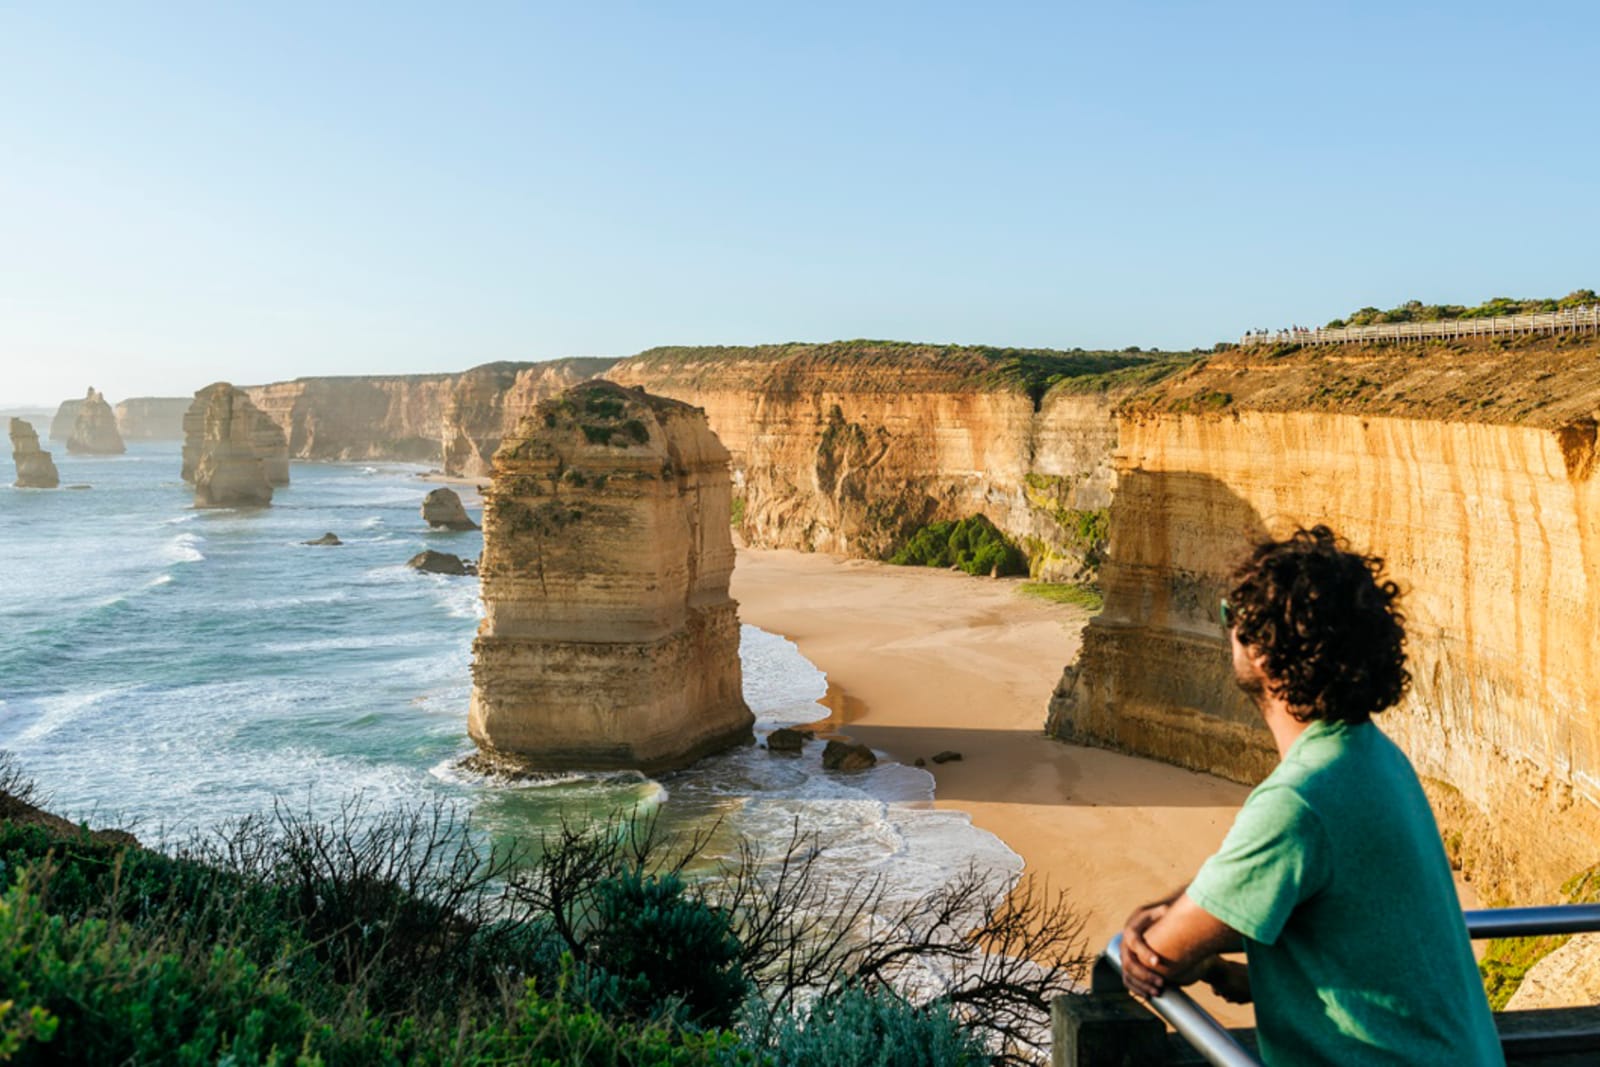 A traveller overlooking the Twelve Apostles rock formation during a pit stop on the Great Ocean Road